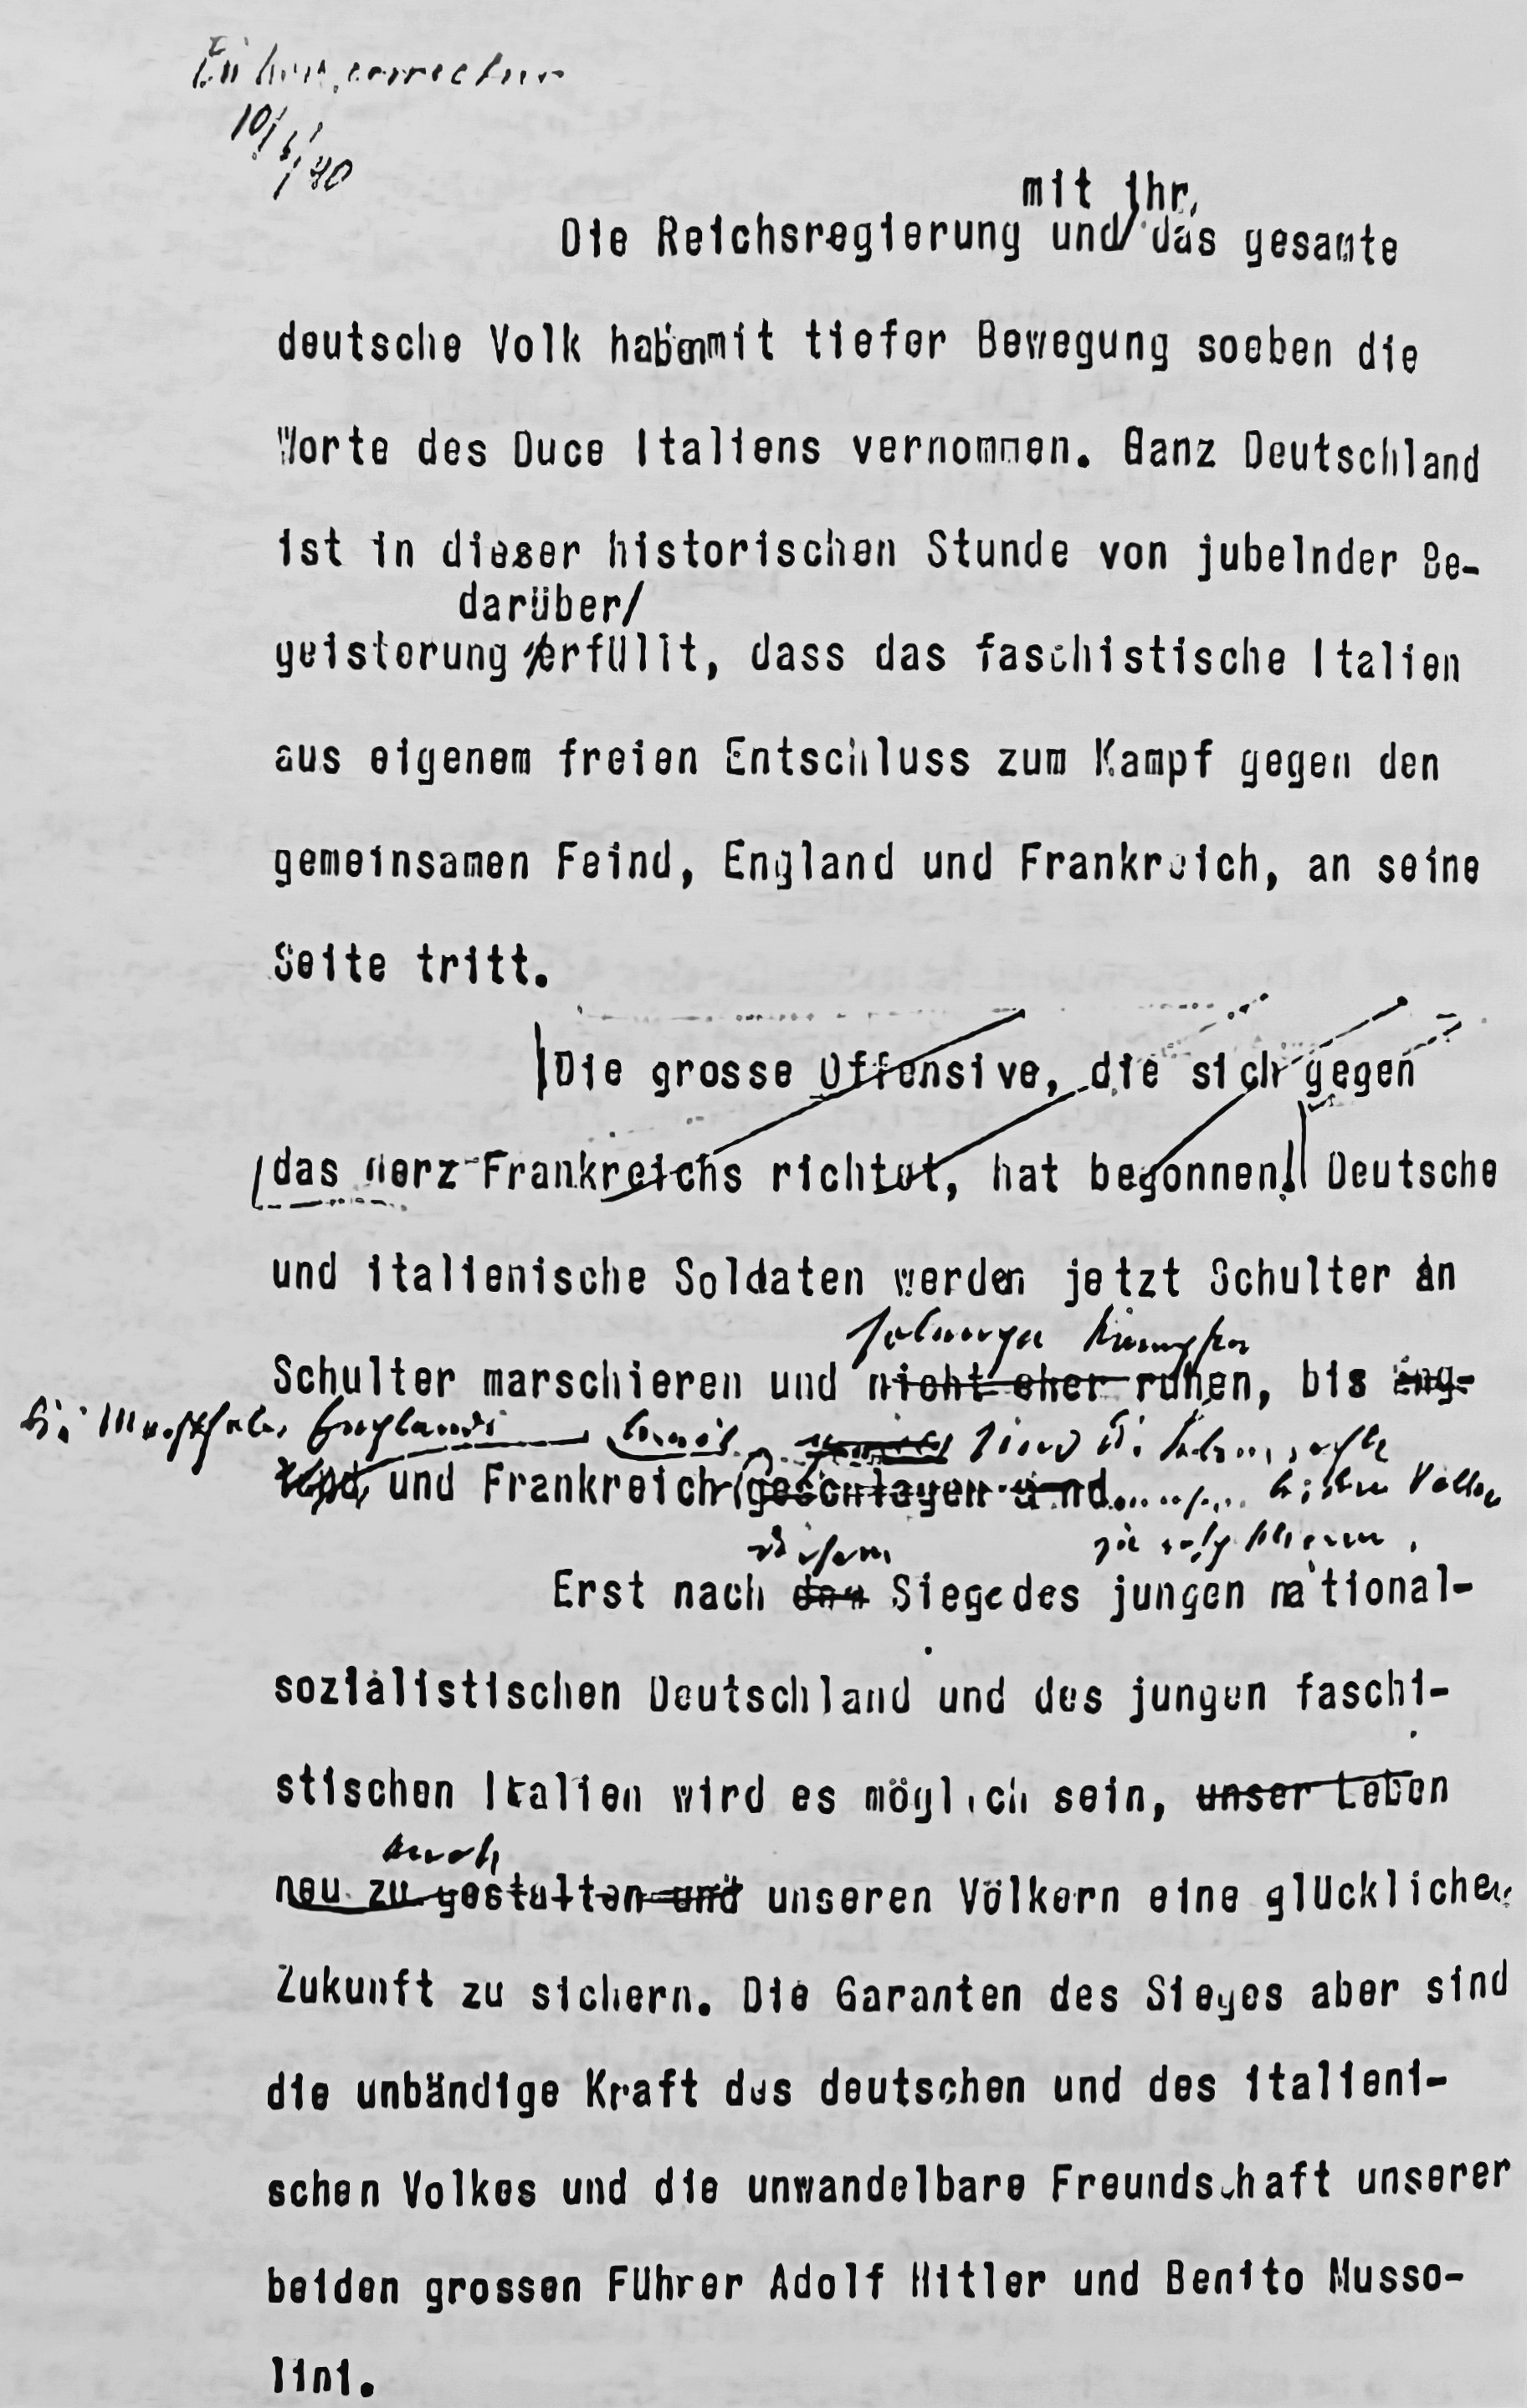 After Mussolini declared the war to France, Adolf Hitler sends a message to the Duce stating his satisfaction that both countries will fight side by side (text written by Hewel with Hitler corrections)